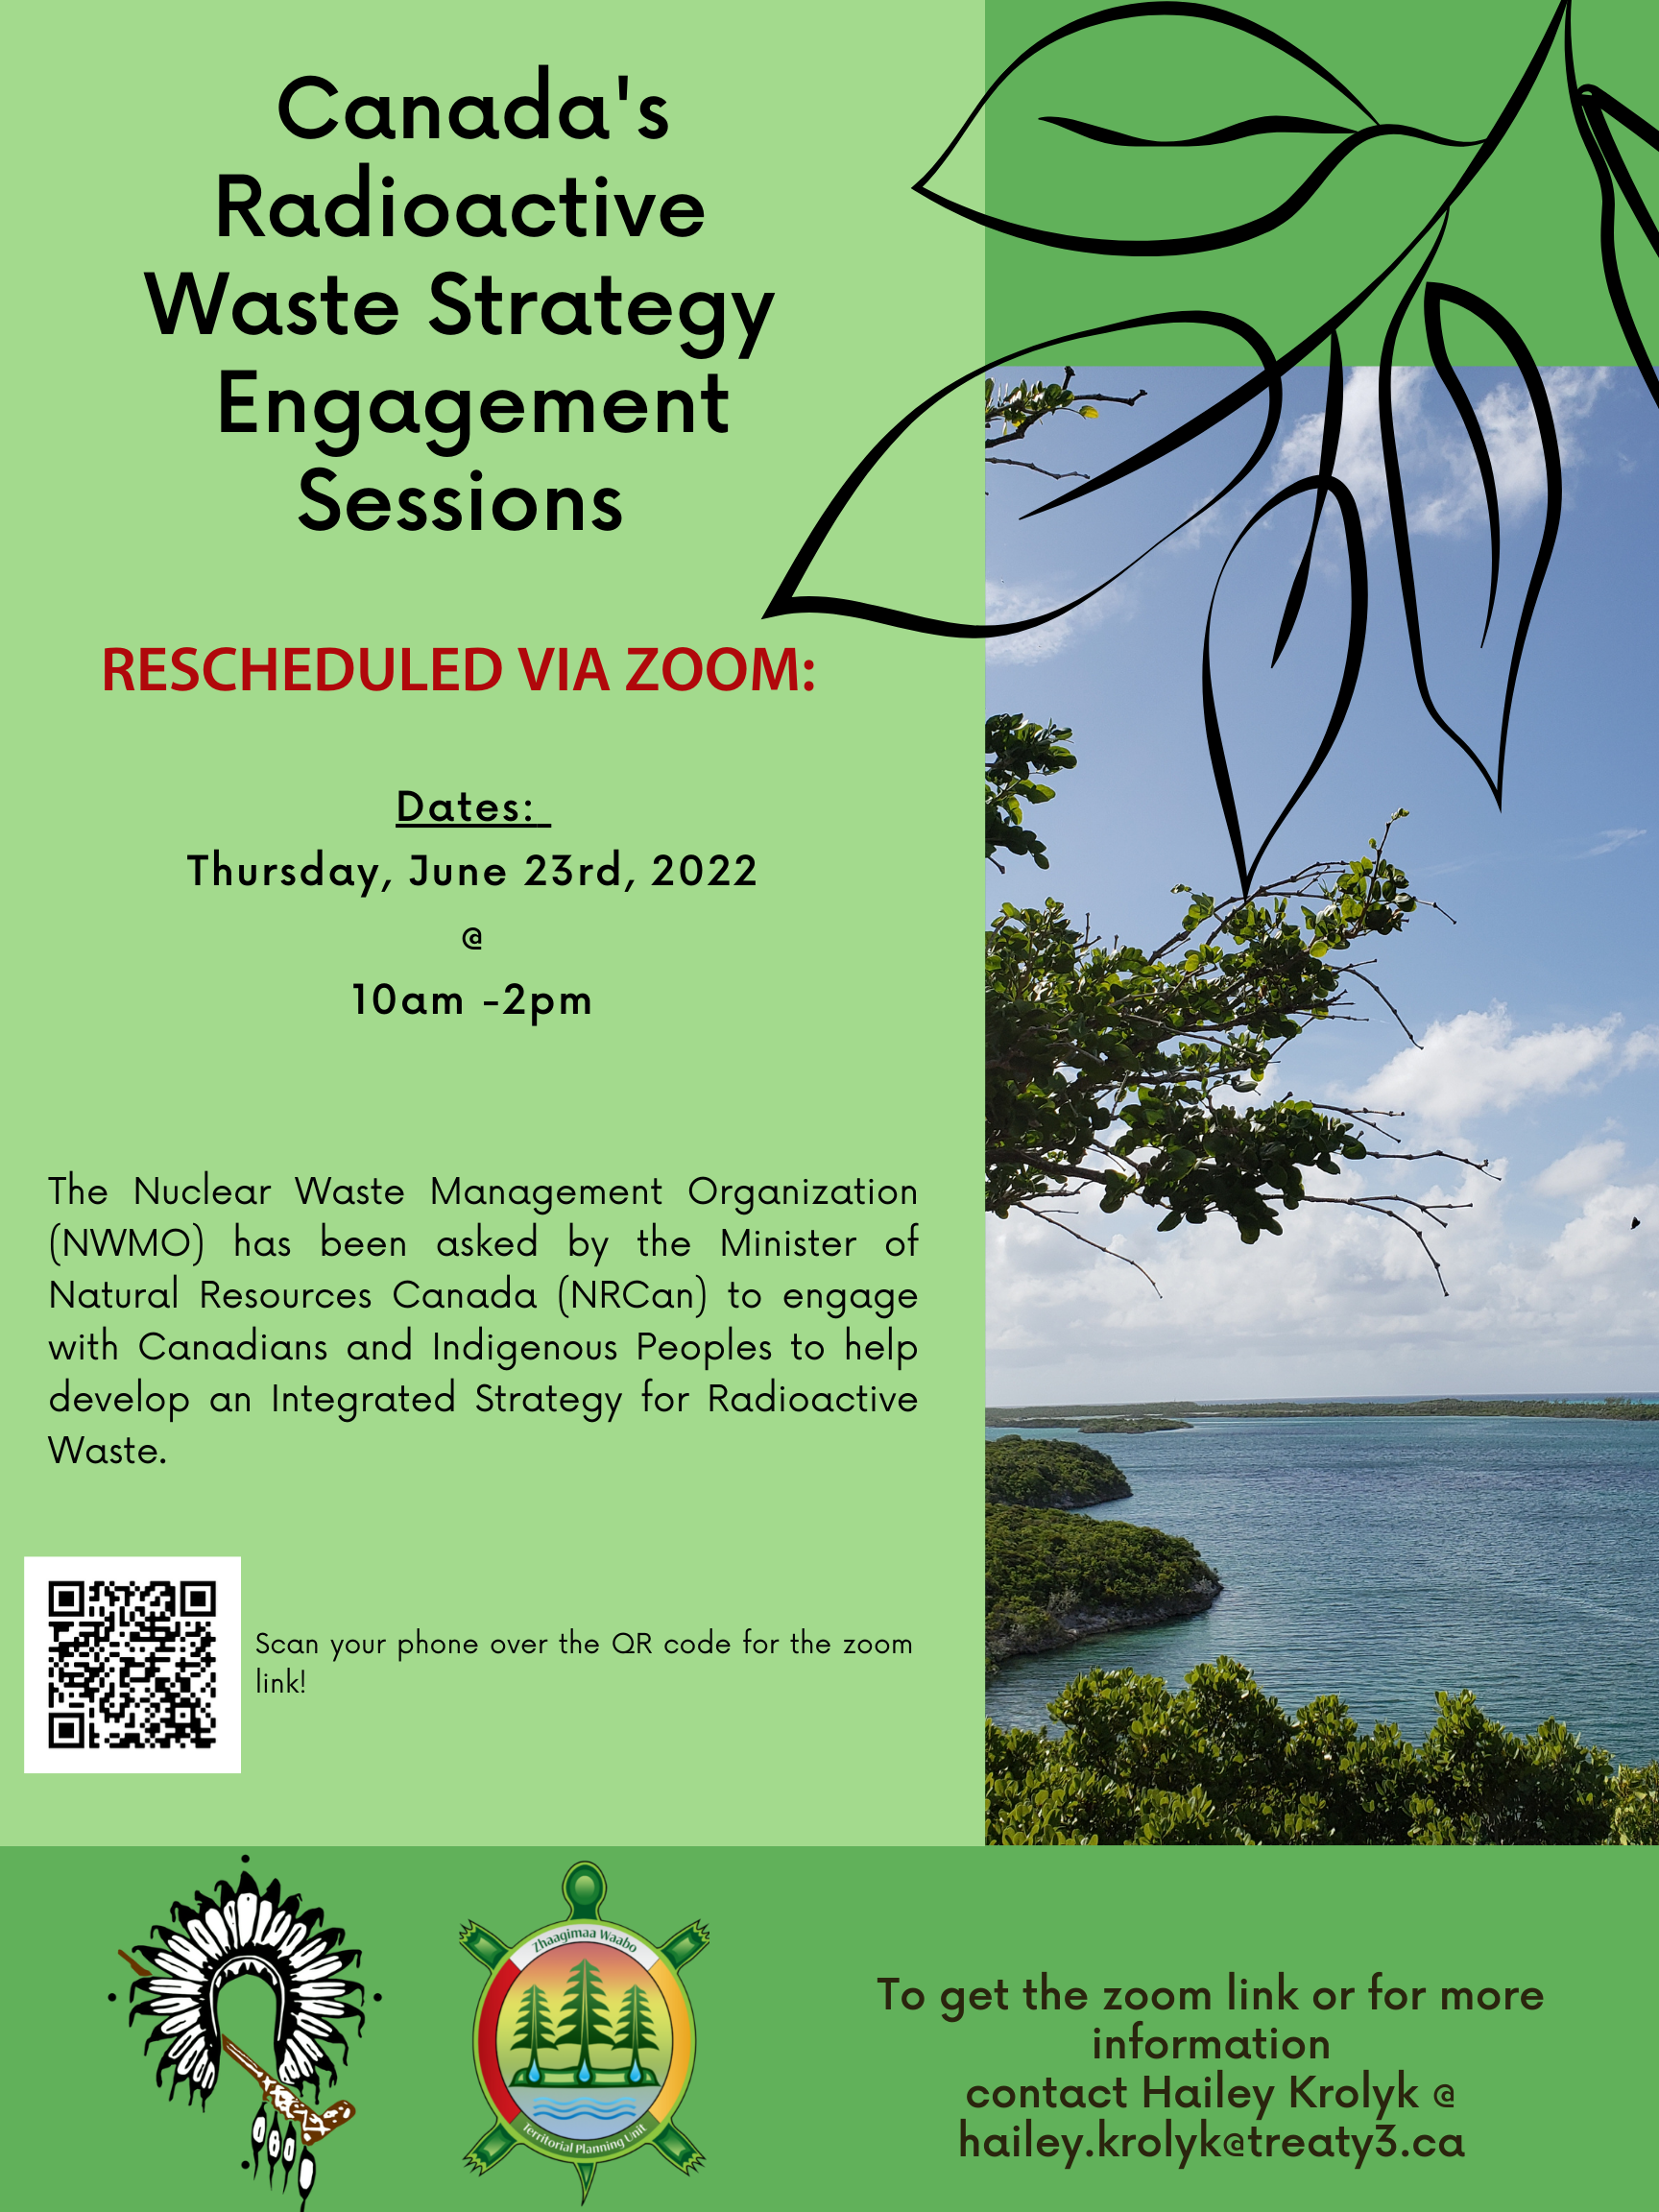 Canada's Radioactive Waste Strategy Regional Engagement Session (Virtual)